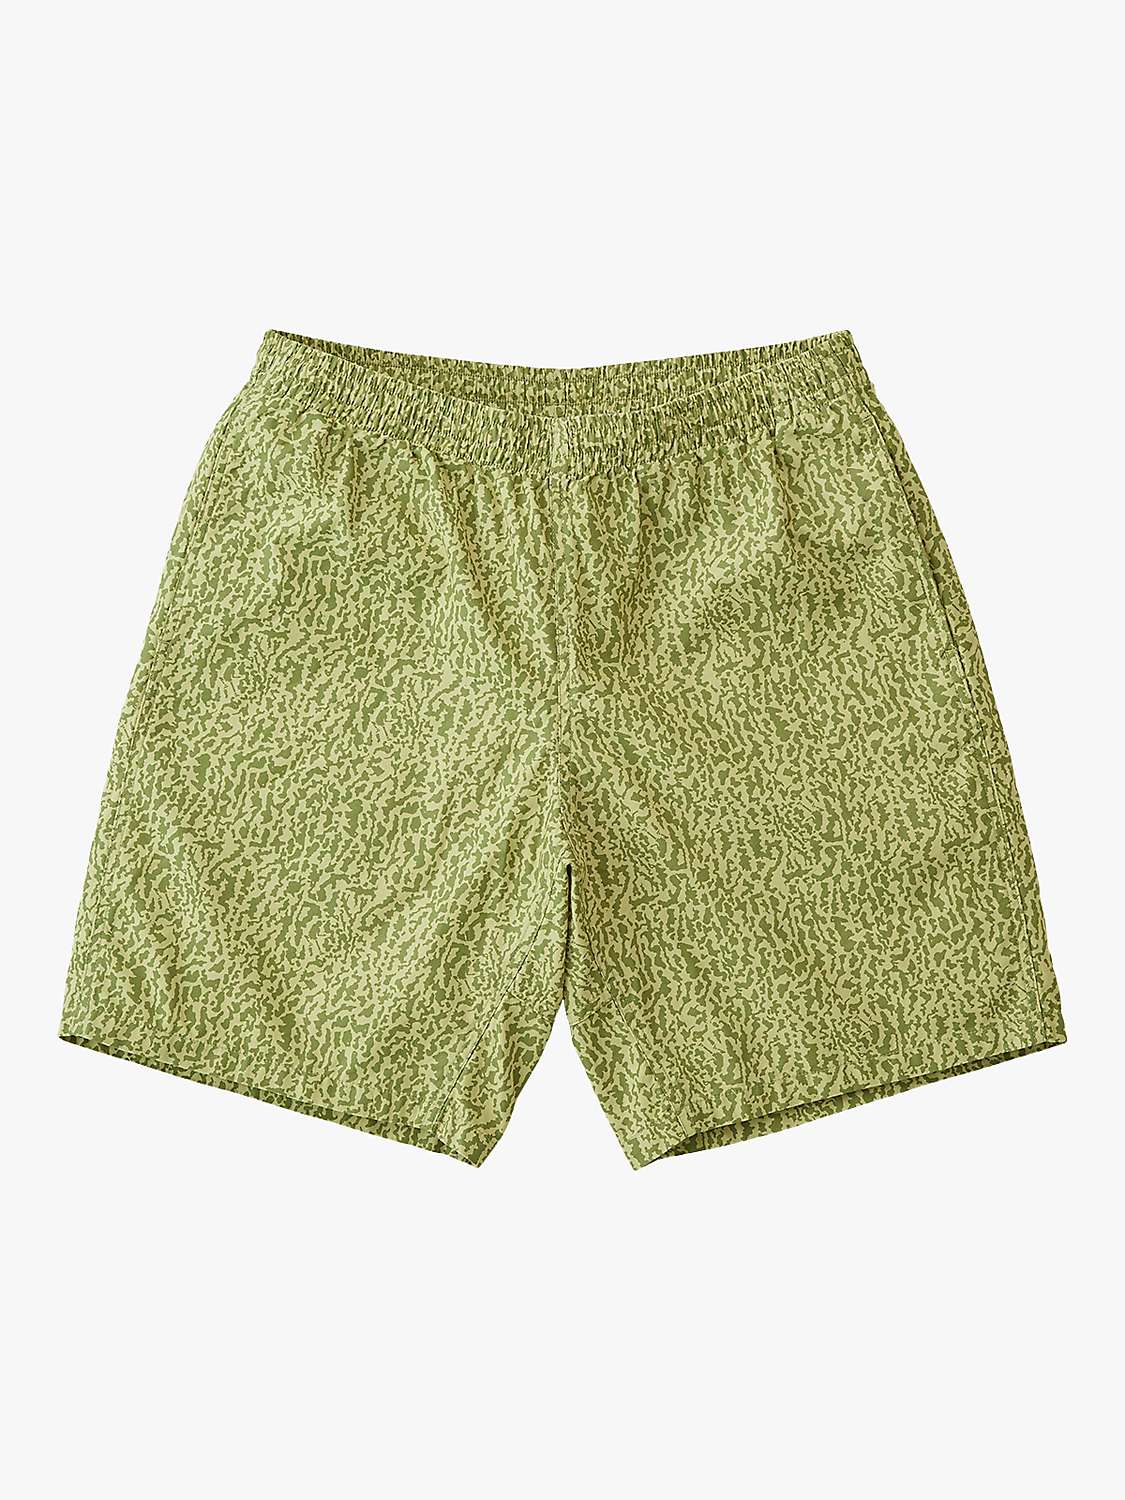 Buy Gramicci Swell Patterned Shorts, Micro Bark Online at johnlewis.com